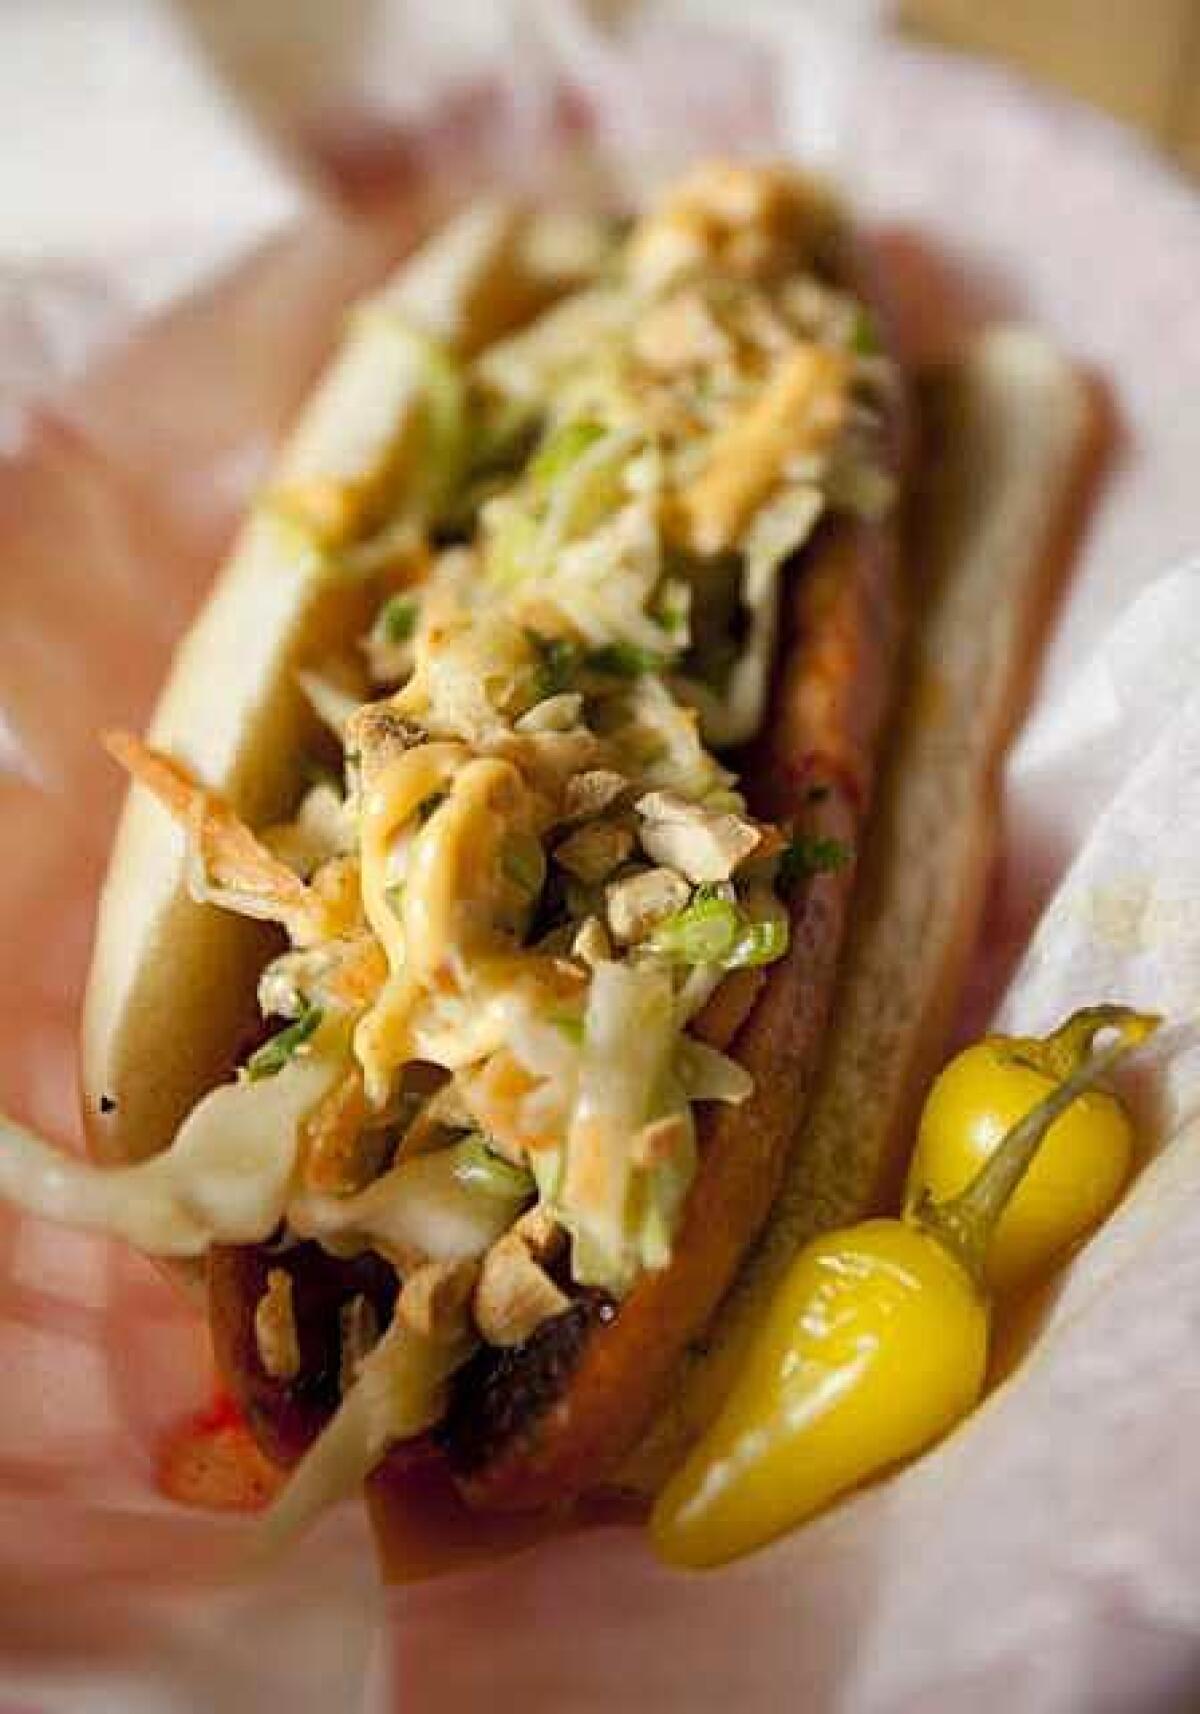 Thai slaw dog: lunch with zip.